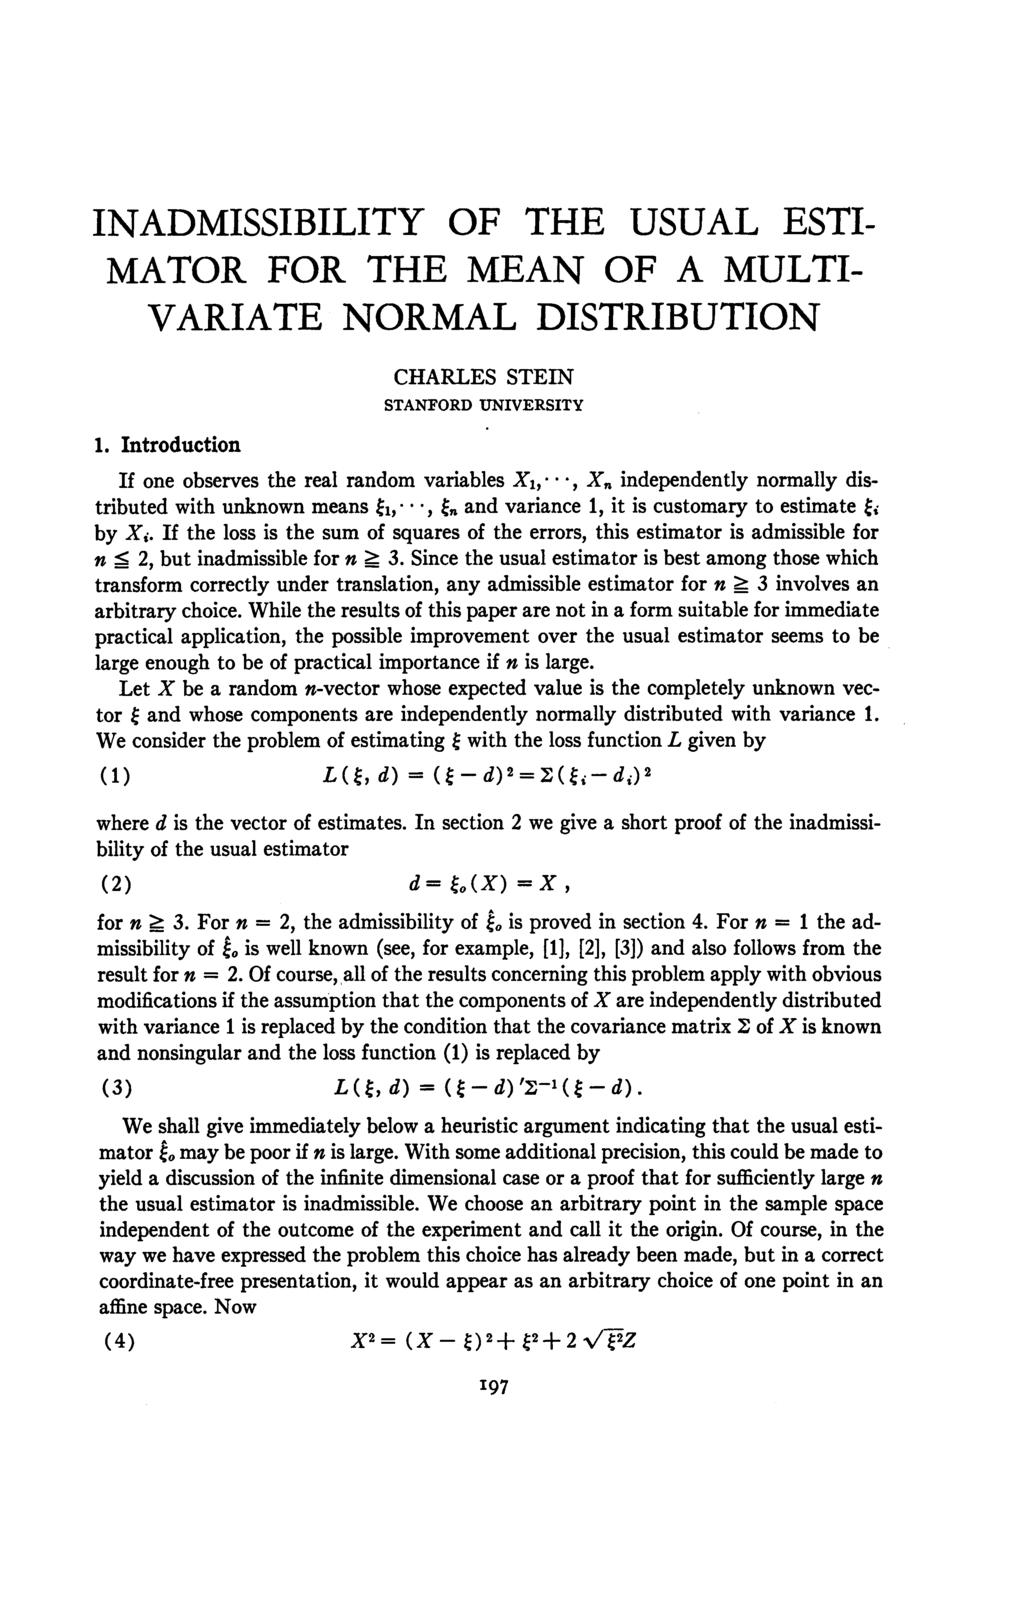 INADMISSIBILITY OF THE USUAL ESTI- MATOR FOR THE MEAN OF A MULTI- VARIATE NORMAL DISTRIBUTION CHARLES STEIN STANFORD UNIVERSITY 1.